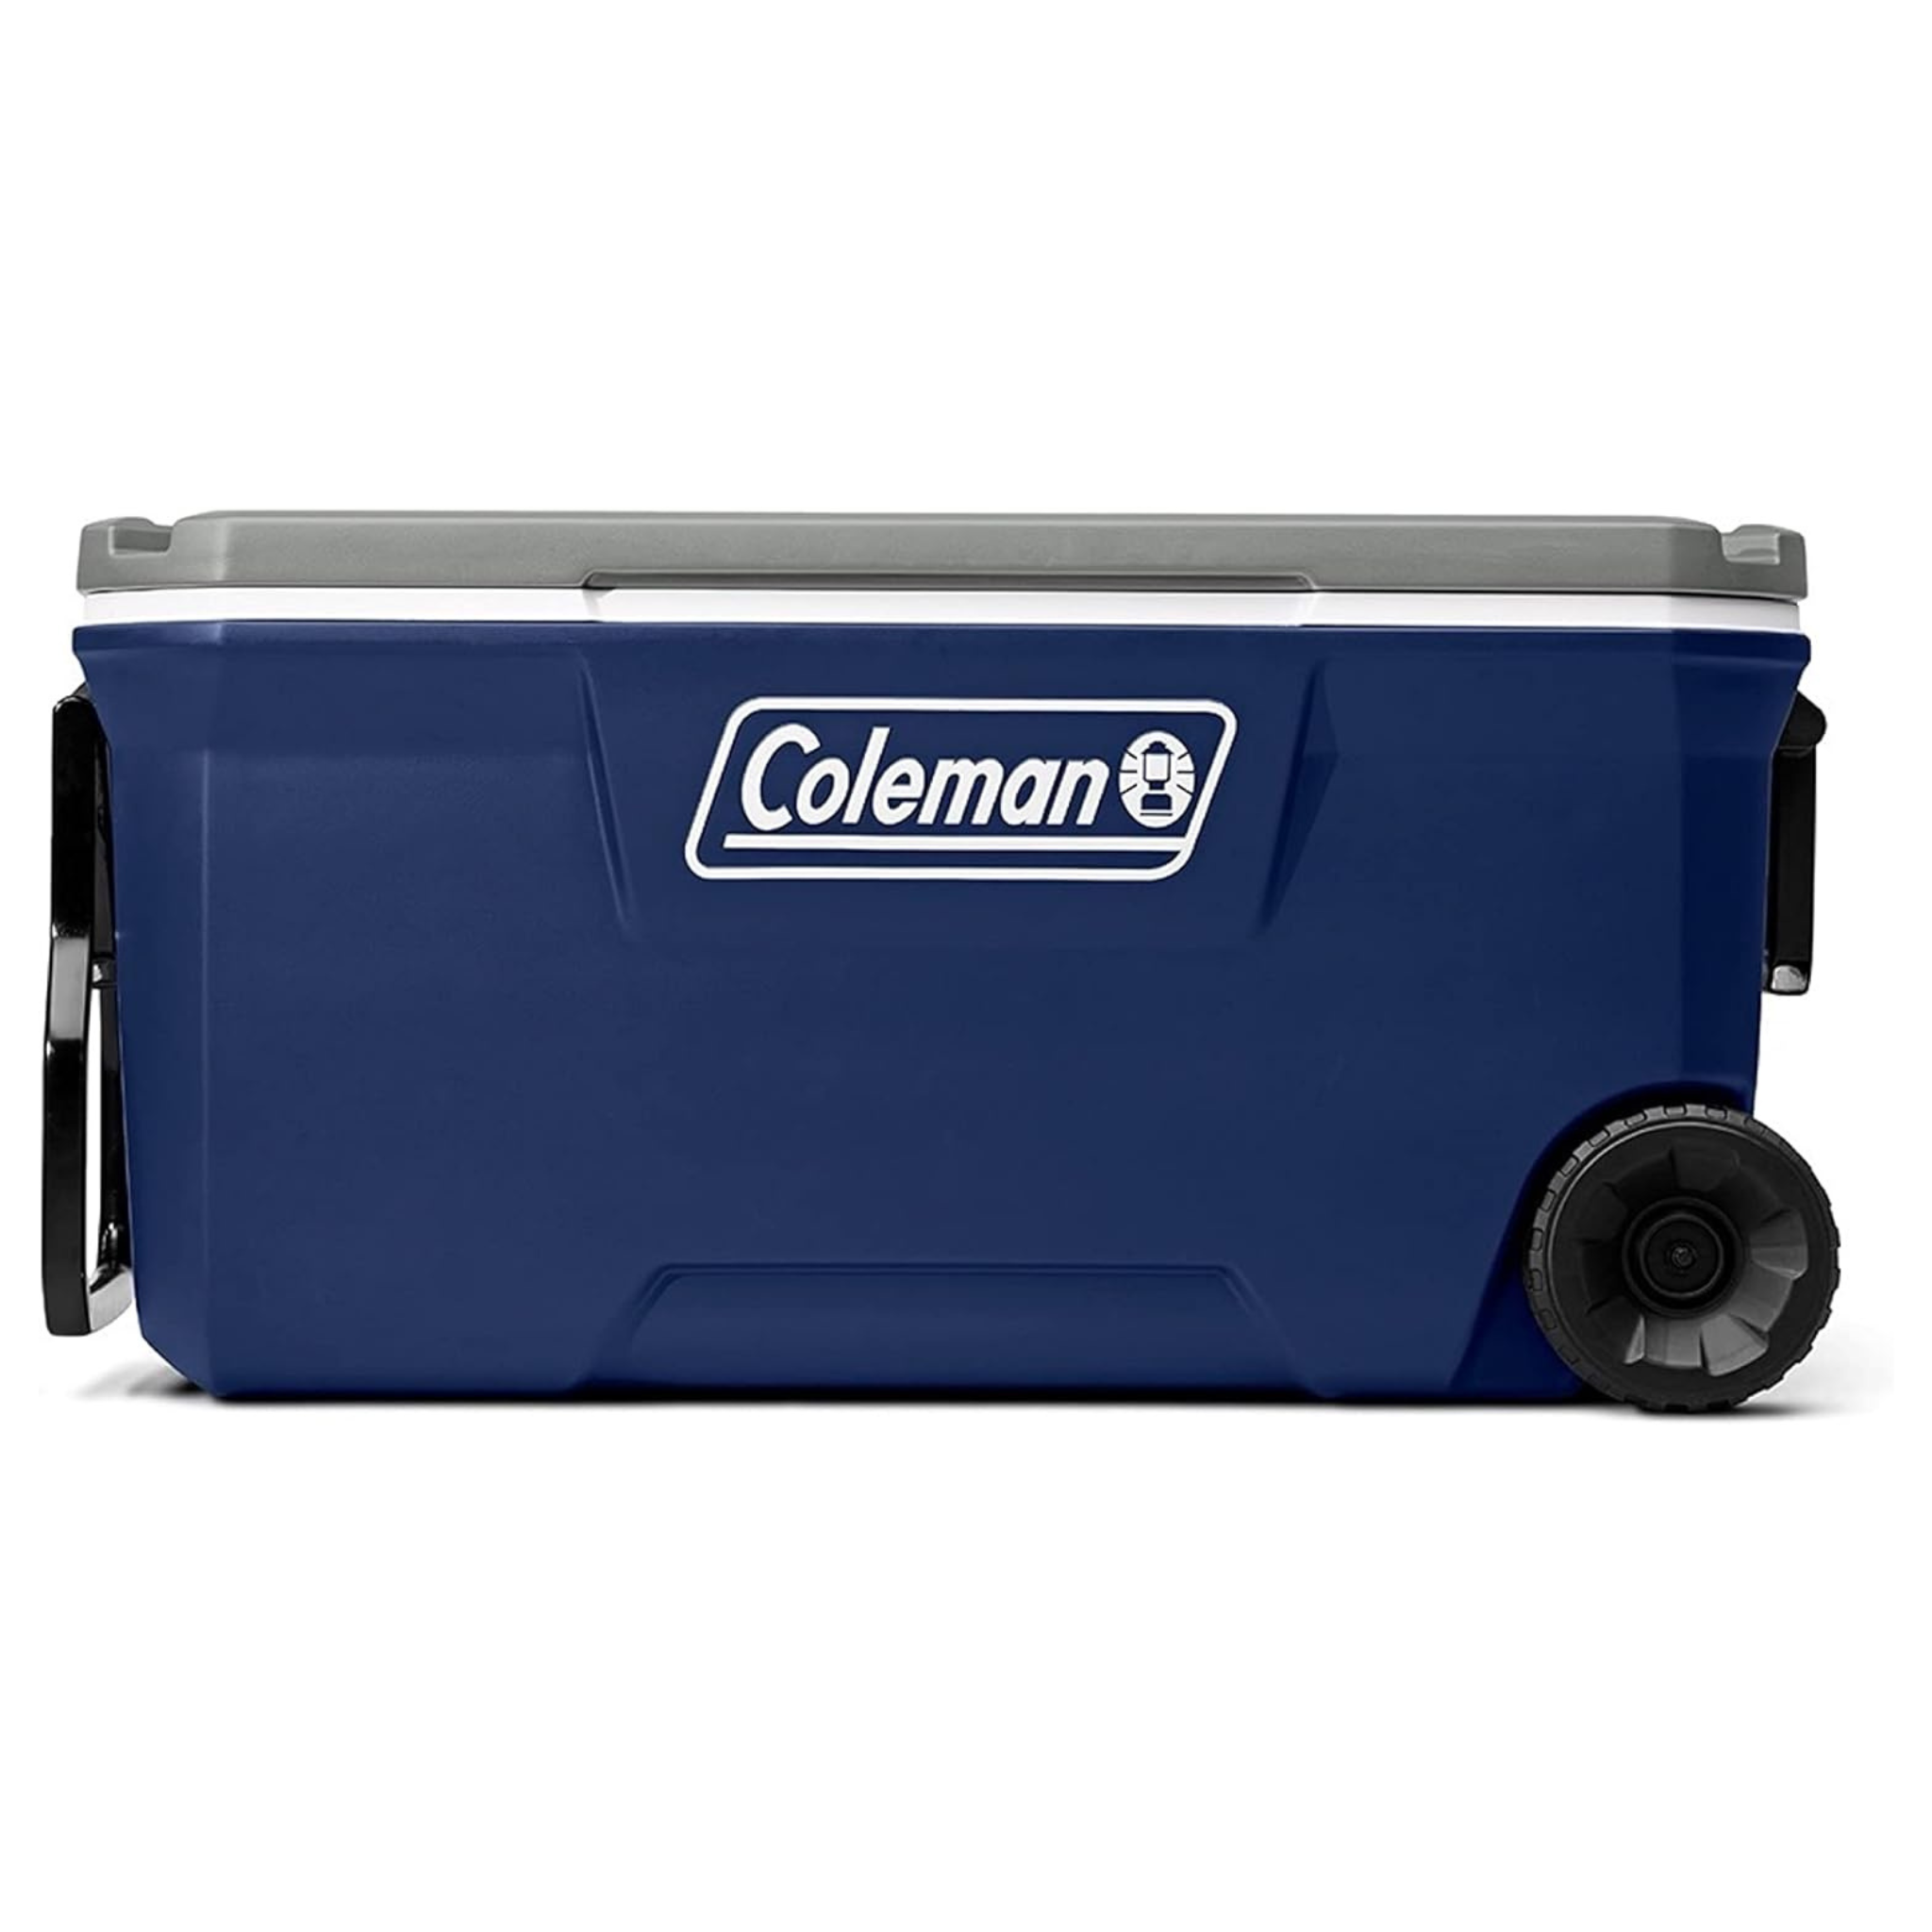 Coleman Coolers On Sale